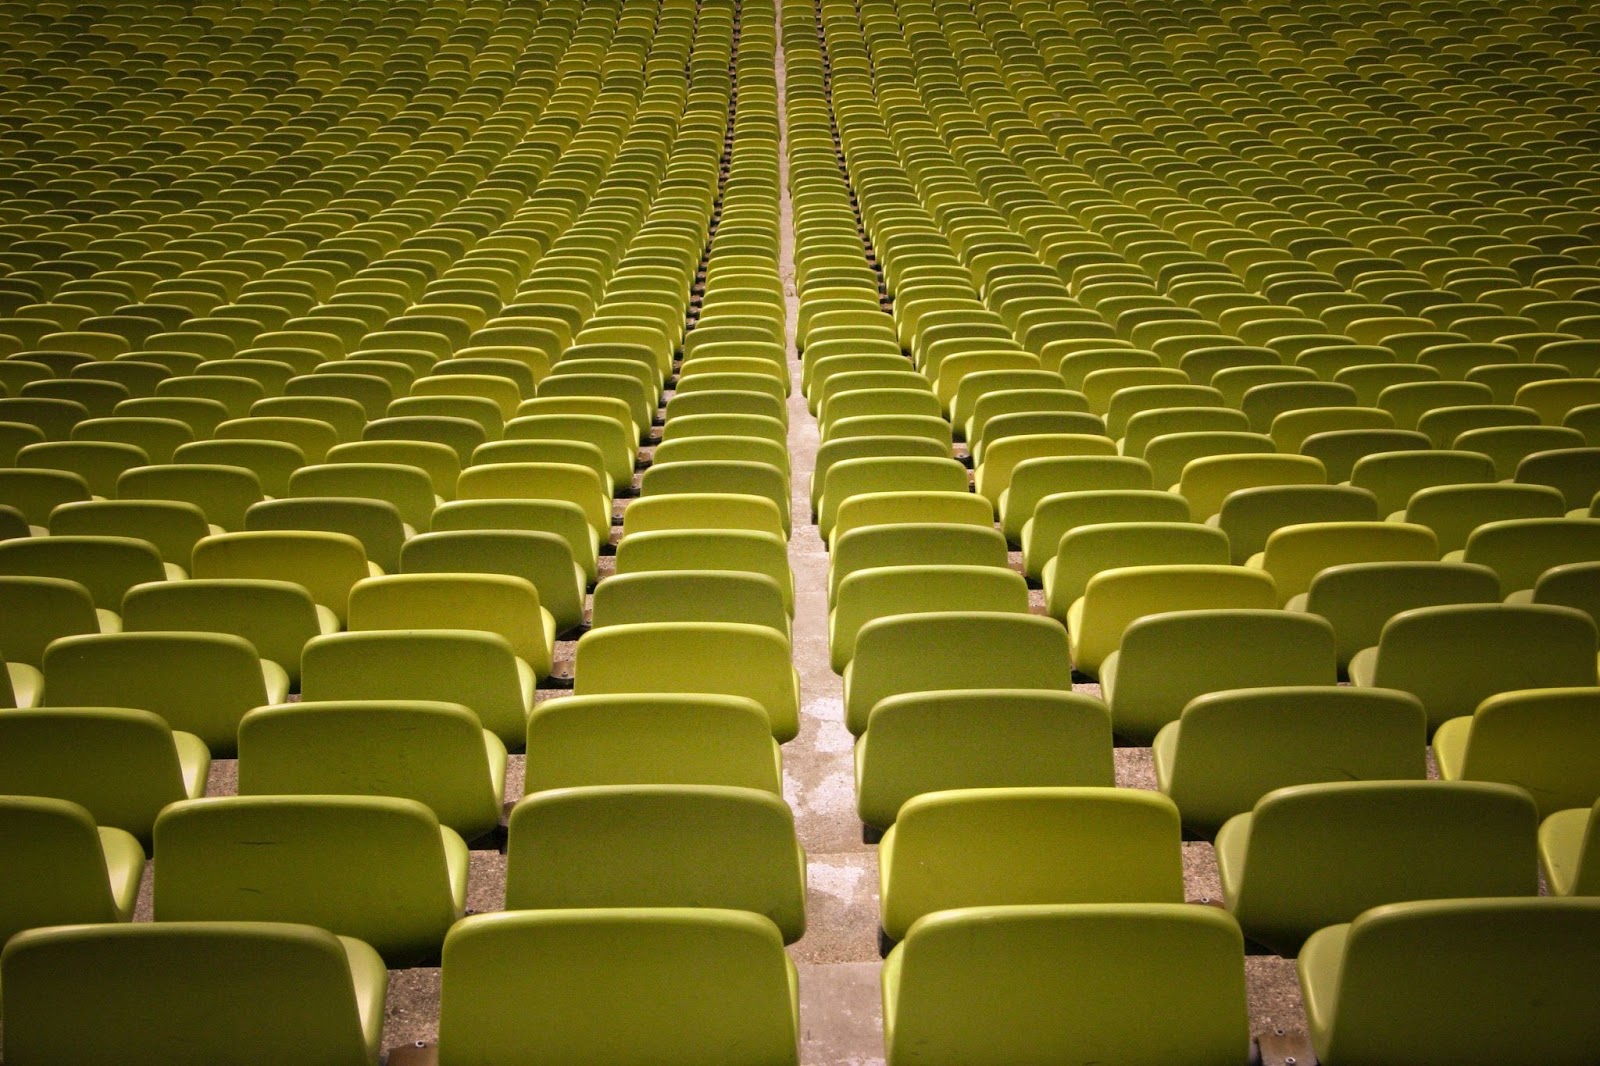 Rows of chairs in an auditorium or stadium 